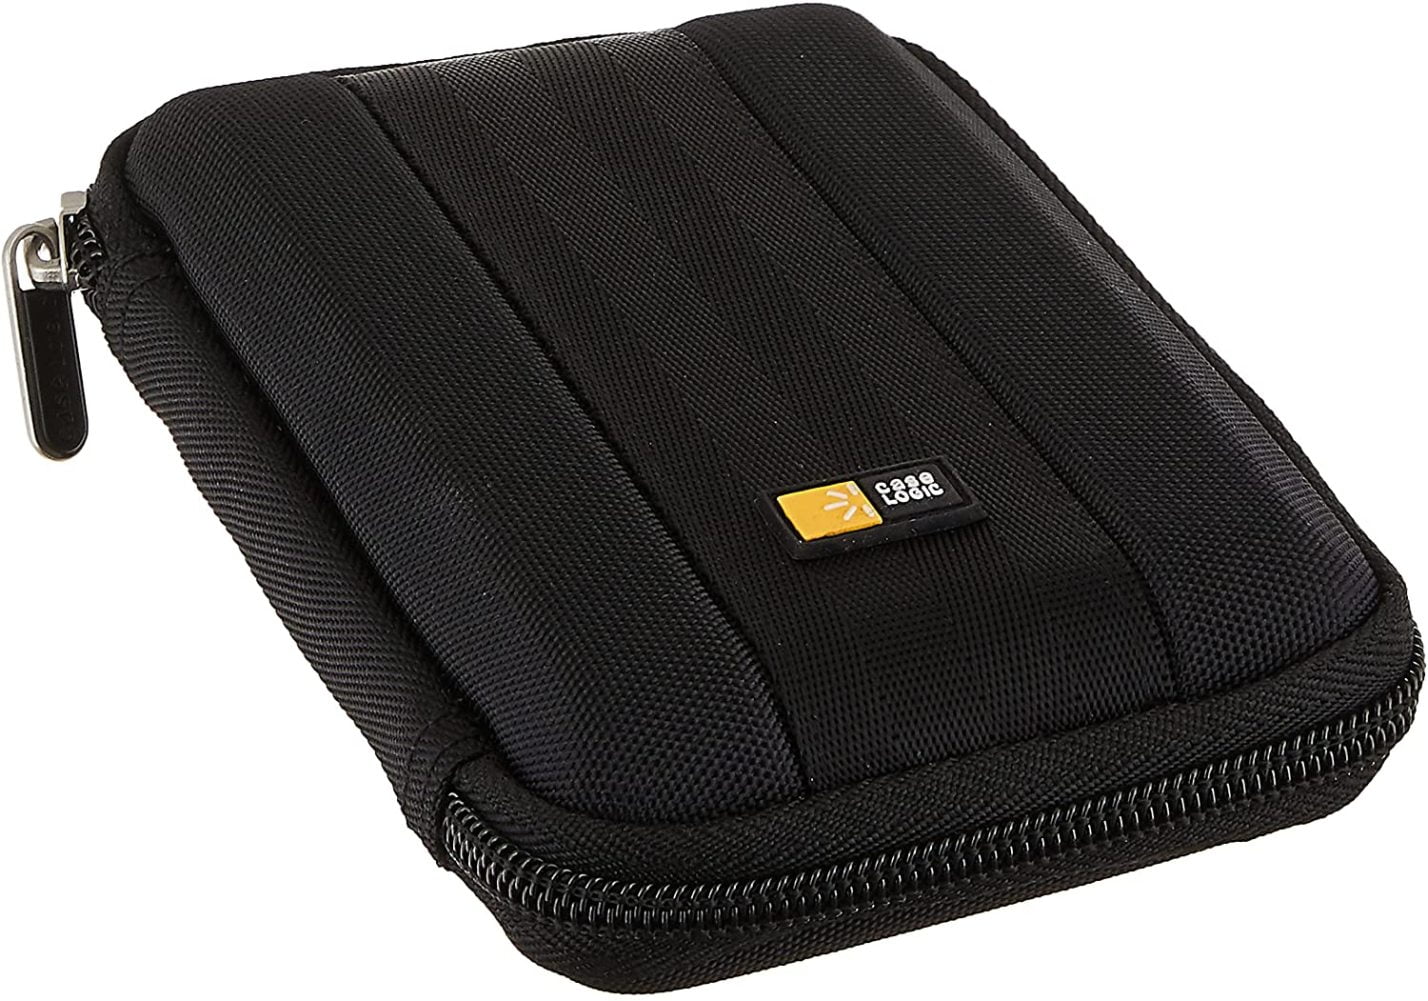 Red Drive Logic DL-64 Portable EVA Hard Drive Carrying Case Pouch 